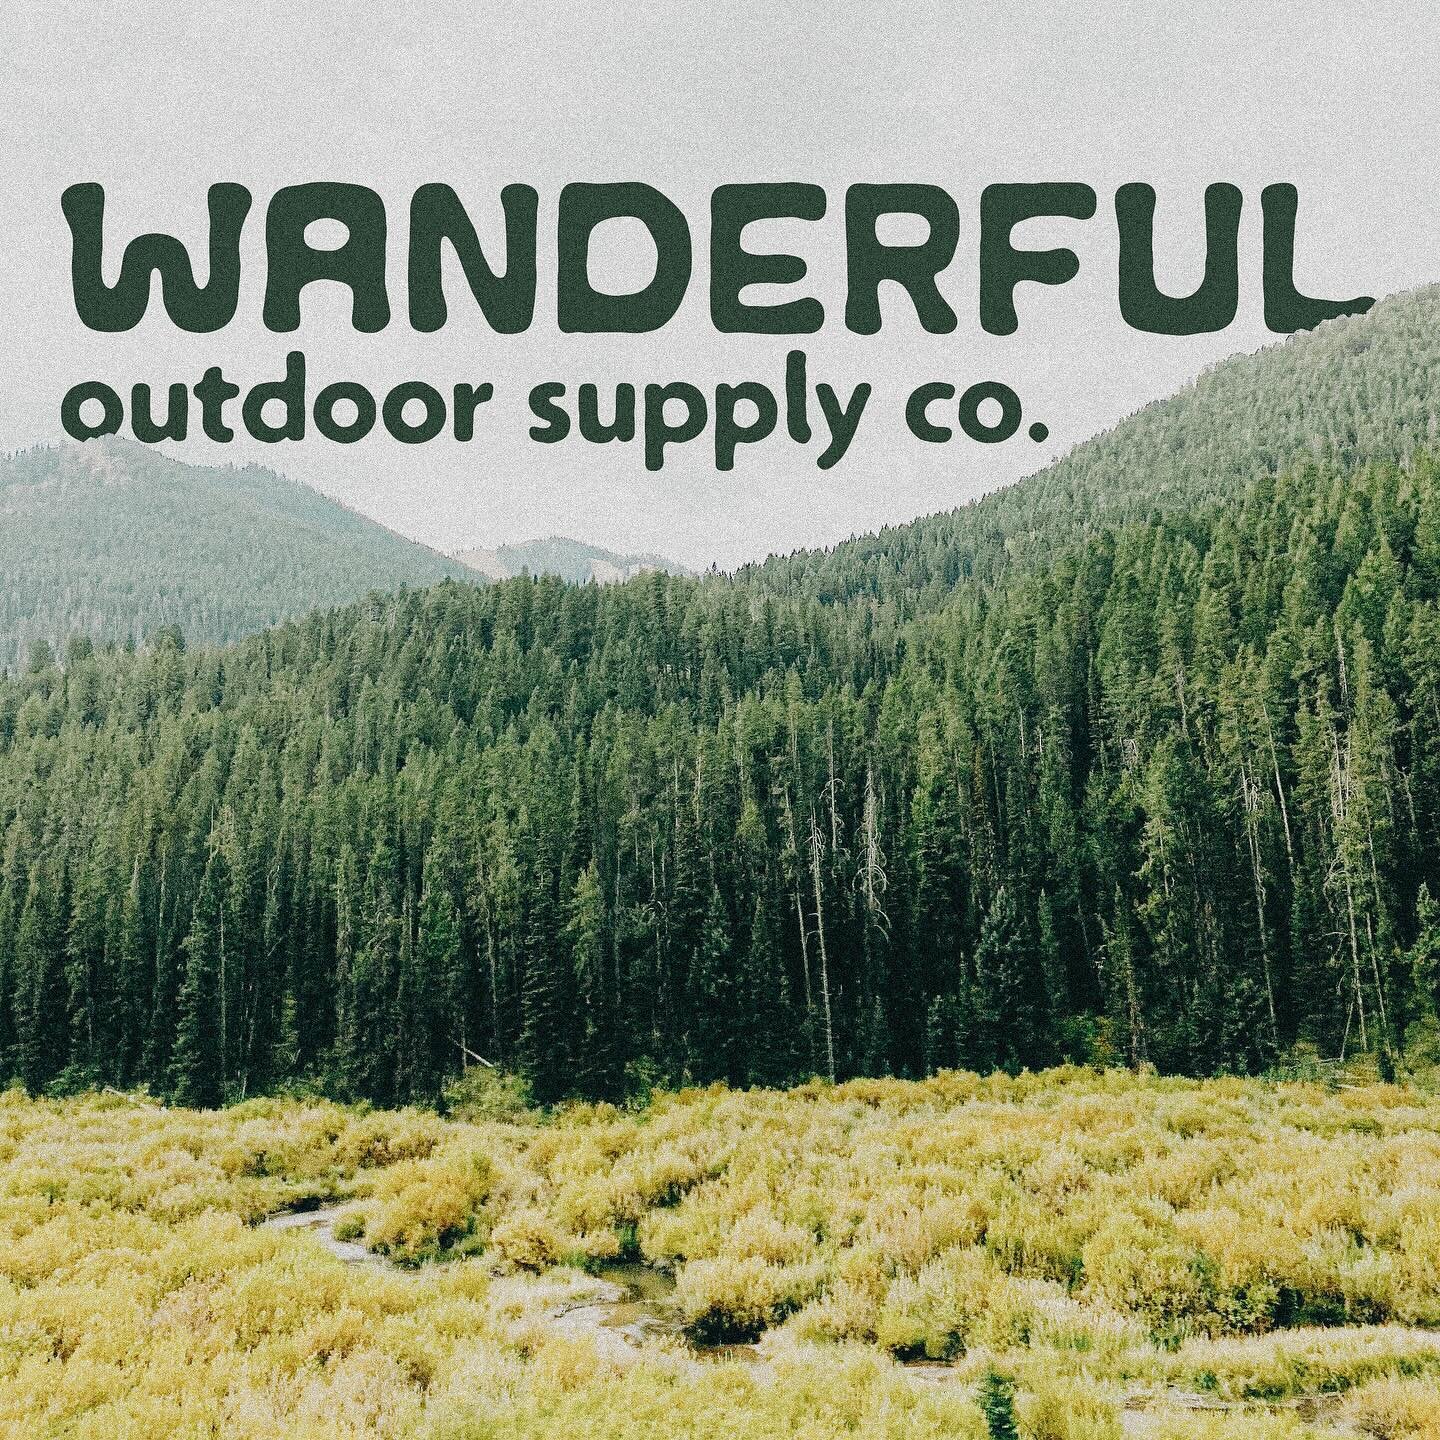 Introducing Wanderful- an outdoors store 🏕️ 

This brief was super fun for the portfolio because I&rsquo;d love to work with an outdoor gear shop one day! This project has hand lettering and illustrations that add such a playful and natural element 